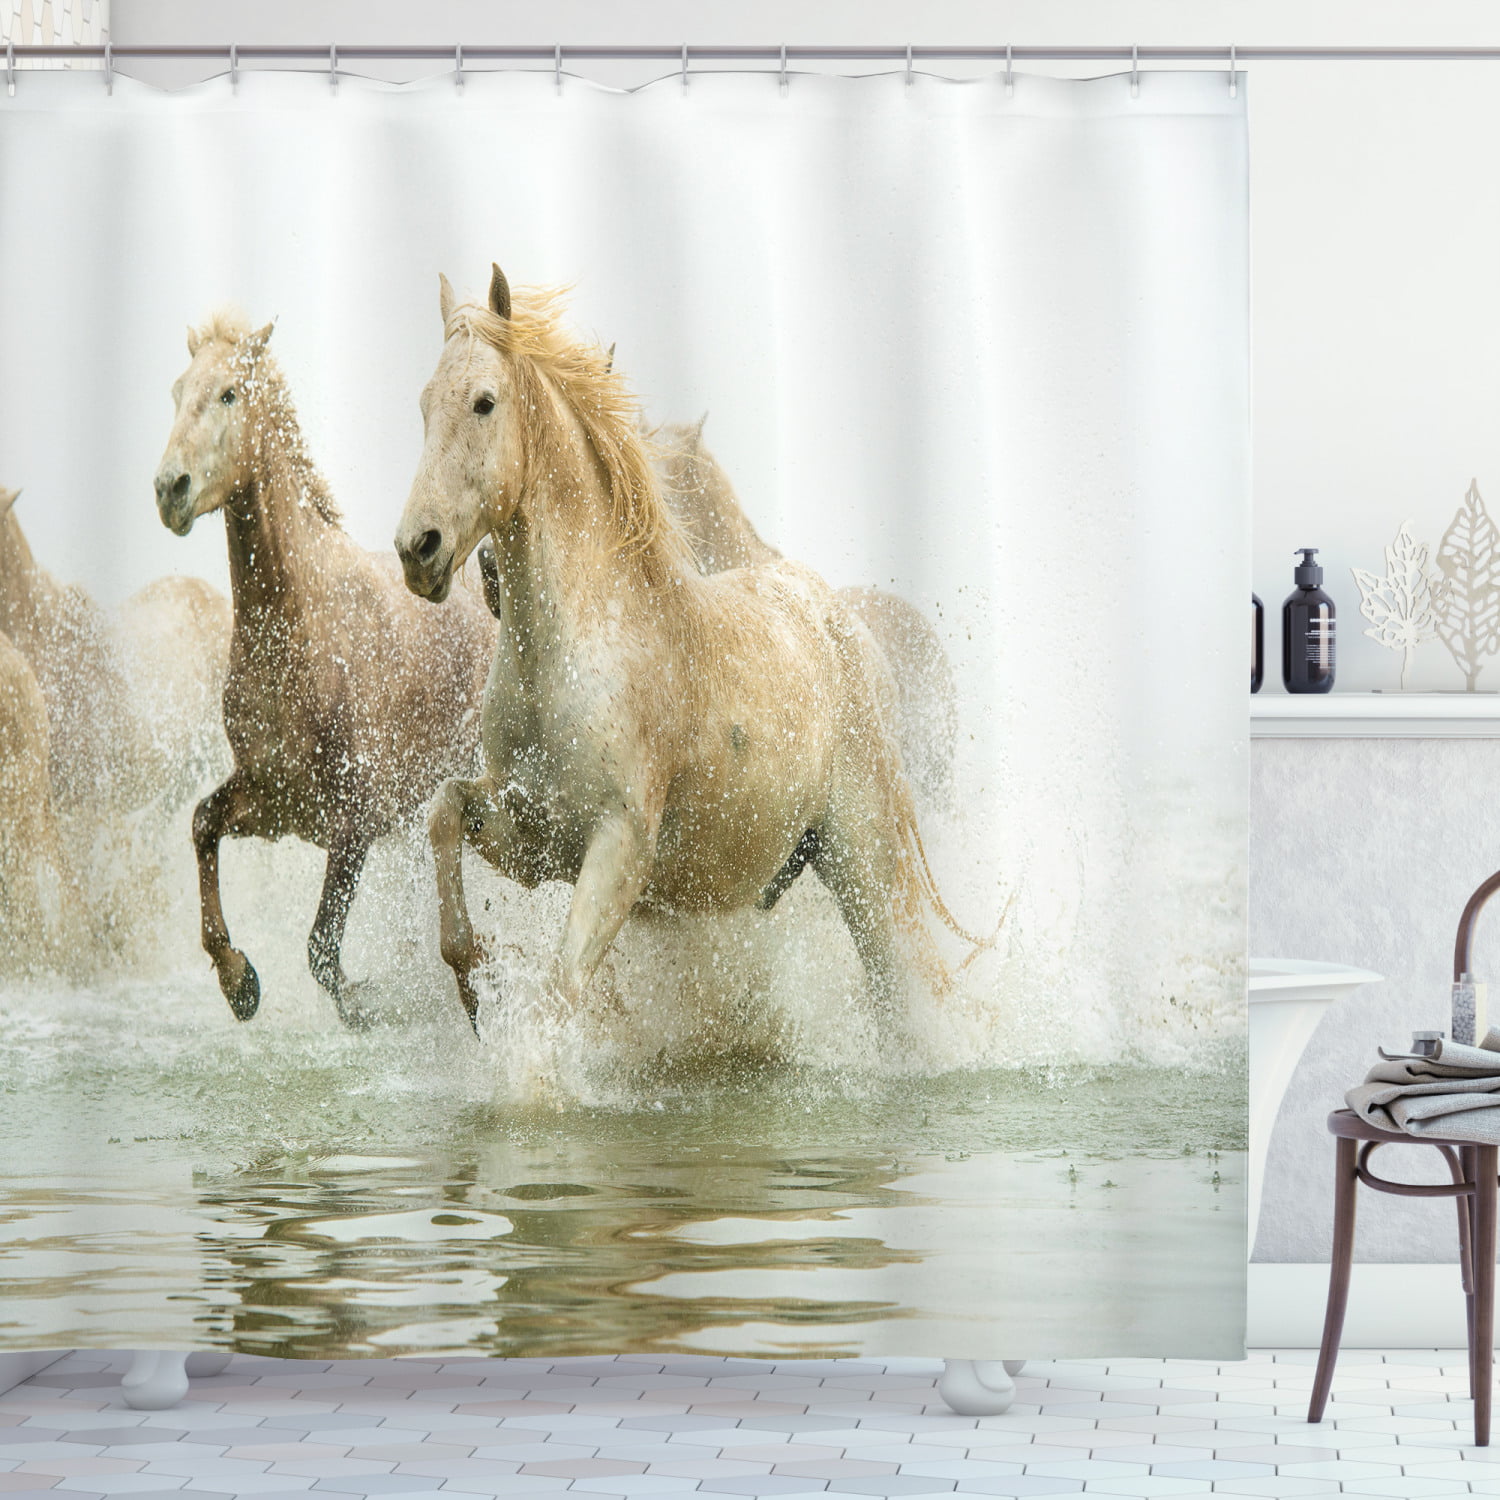 Animal Decor Aquarium Background Sticker Camargue Horses in The Water Ancient Oldest Breed in Southern France Origin Artful Photo PVC Fish Tank Background Adhesive White Beige 